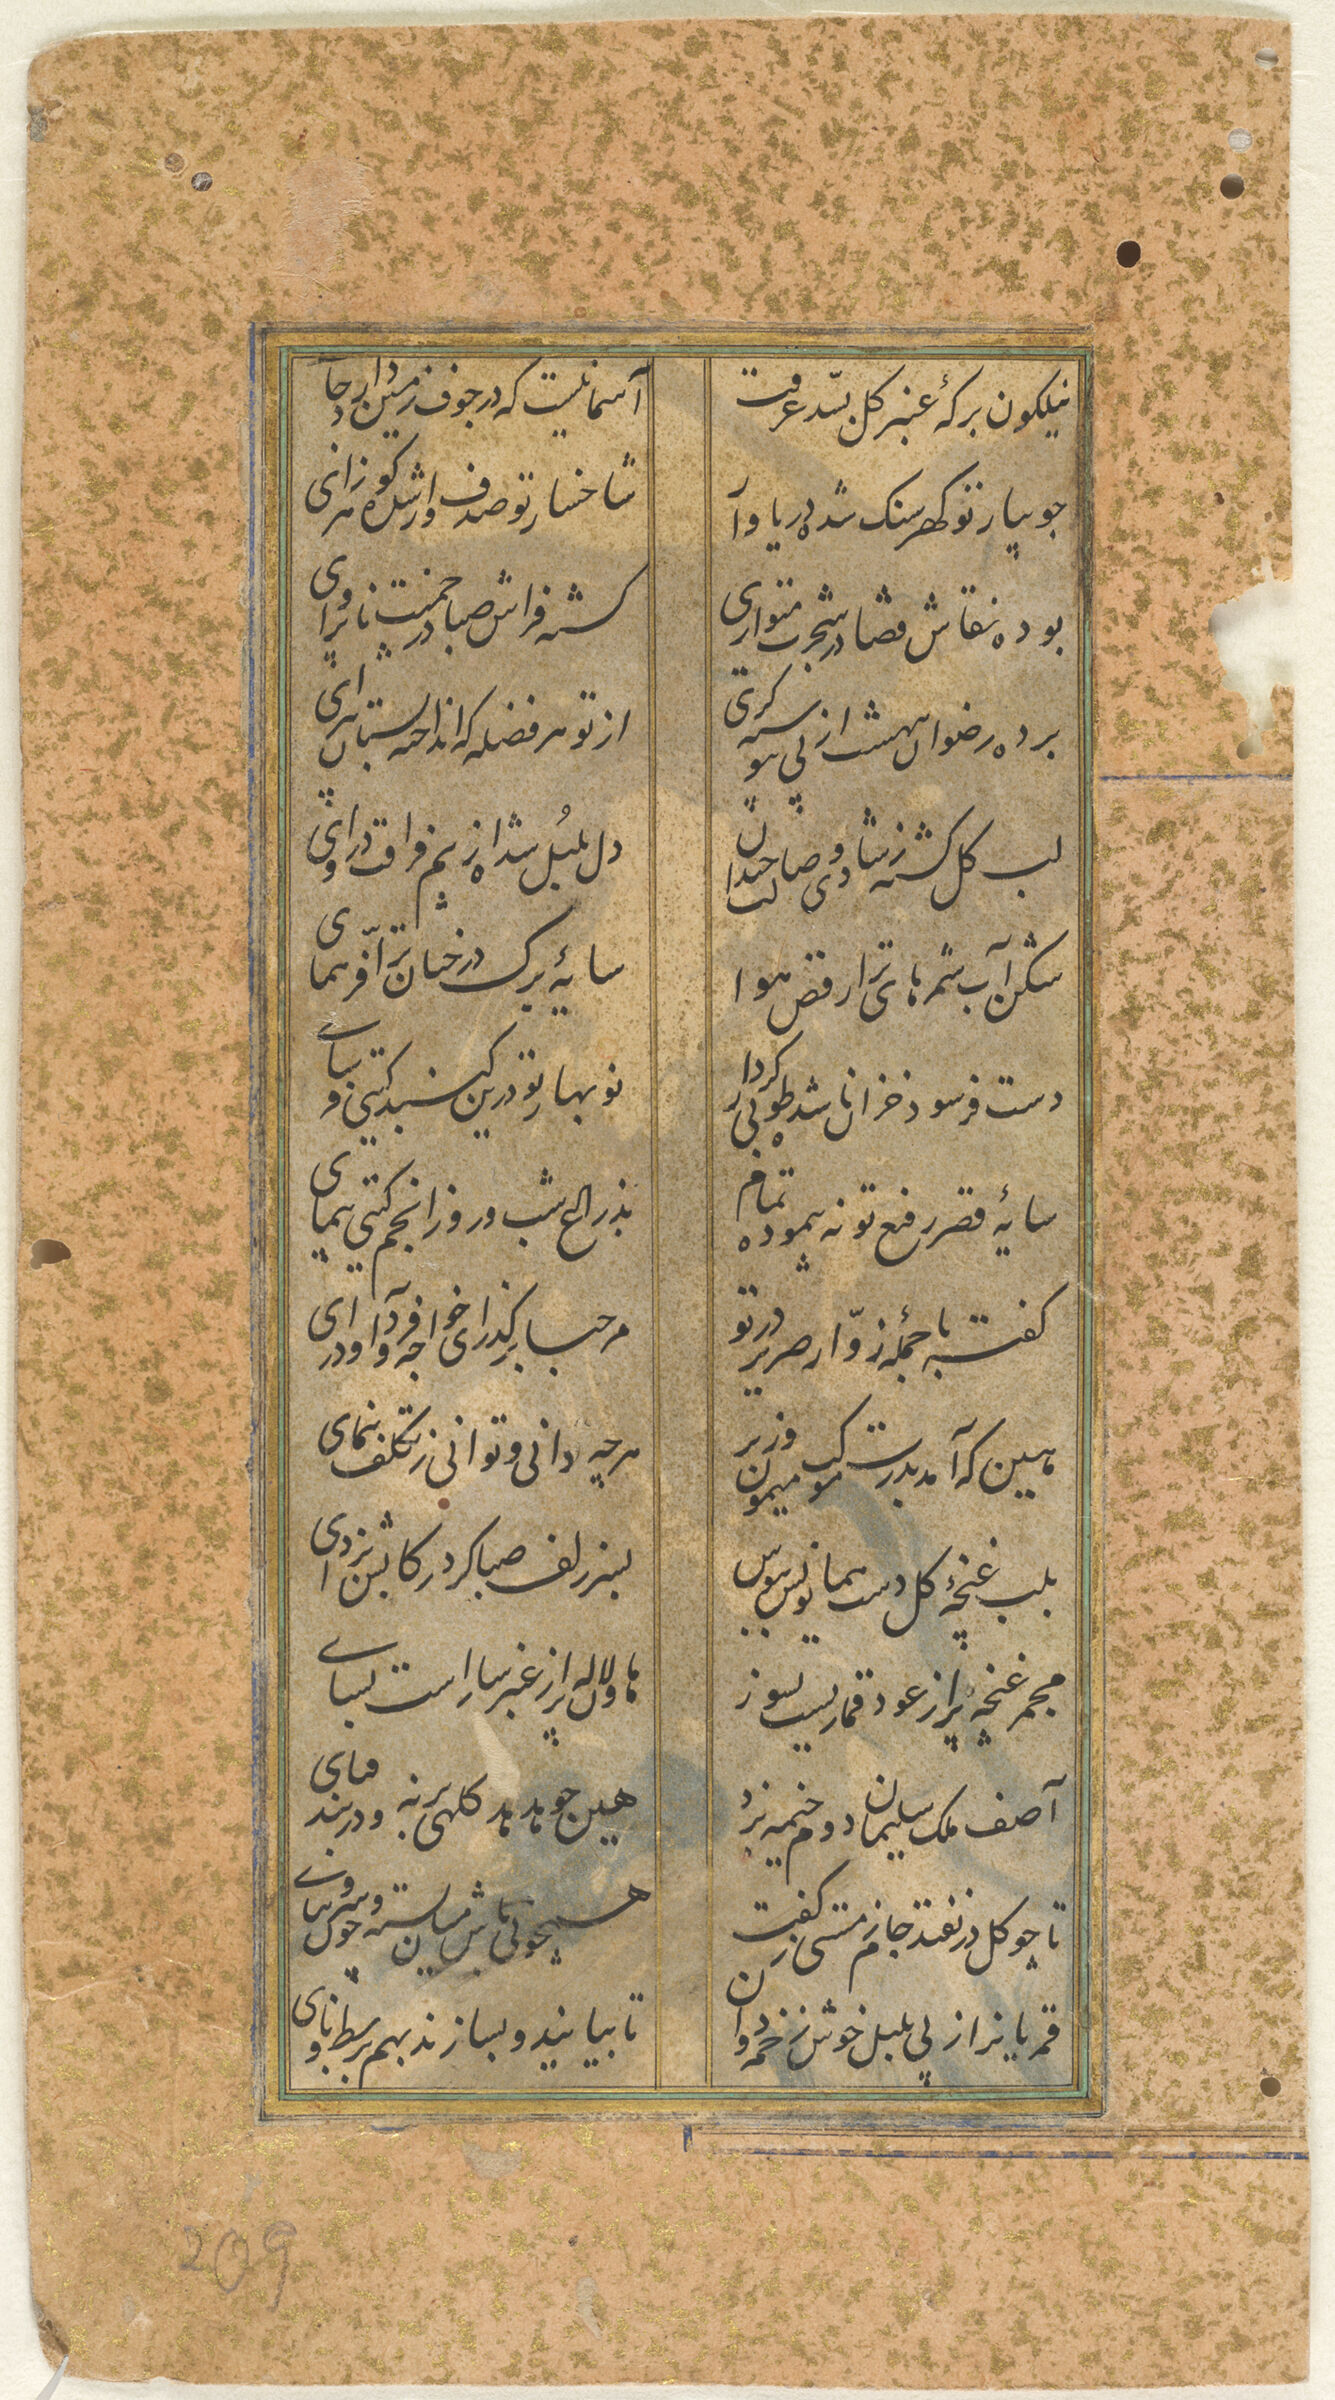 Folio 209 (Text, Recto And Verso), From A Manuscript Of The Divan (Collection Of Works) Of Anvari